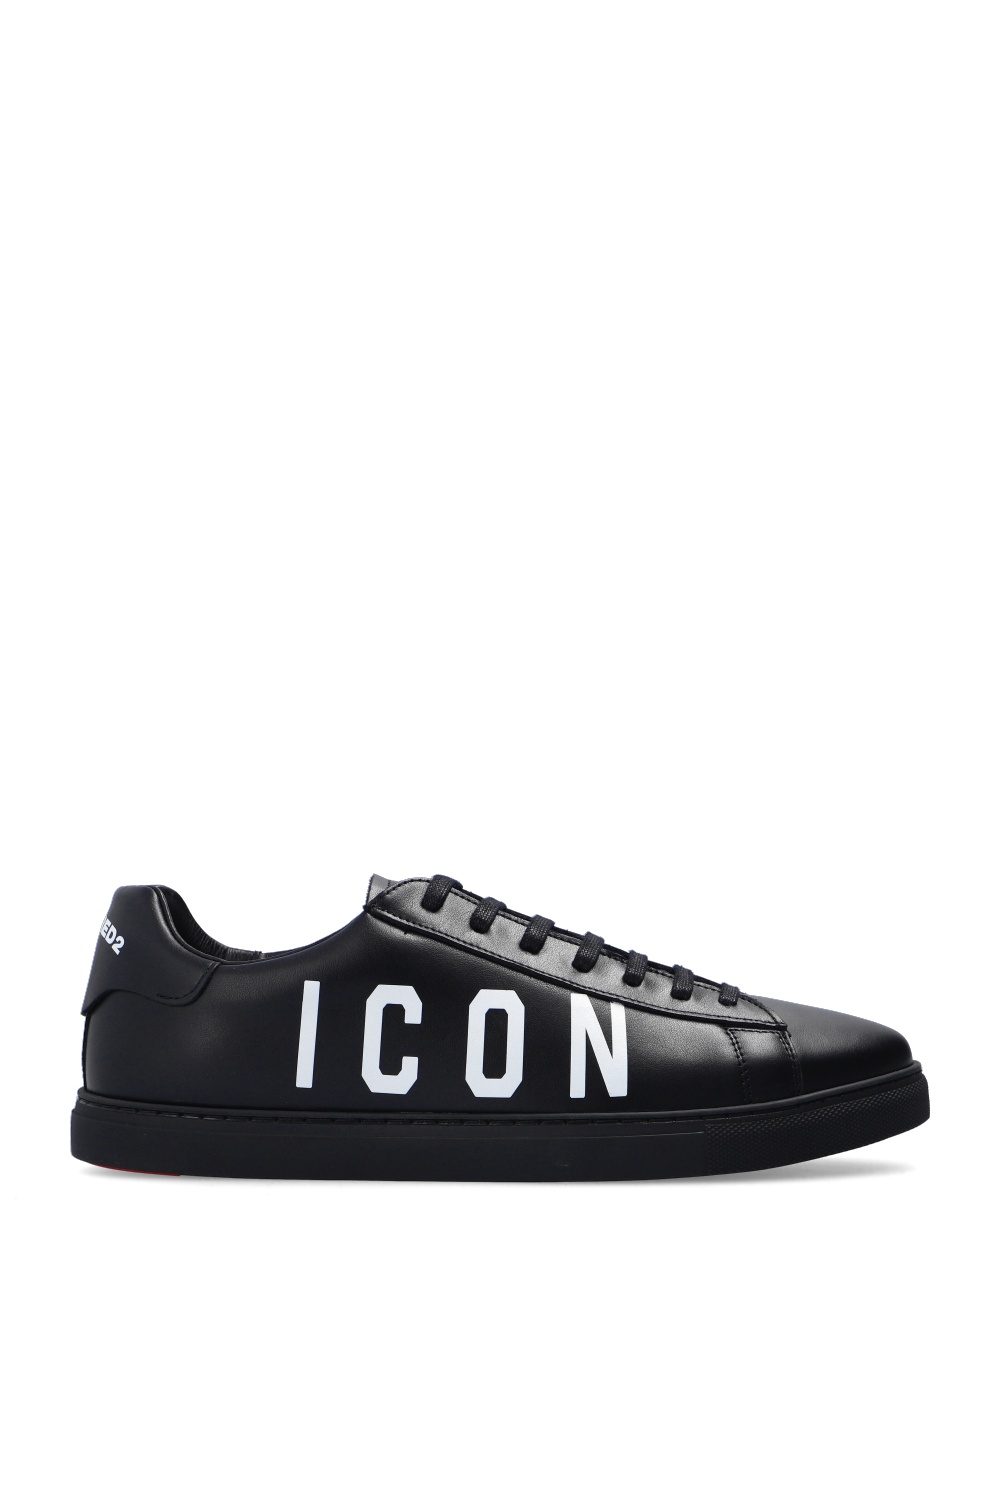 Dsquared2 ‘New Tennis’ sneakers